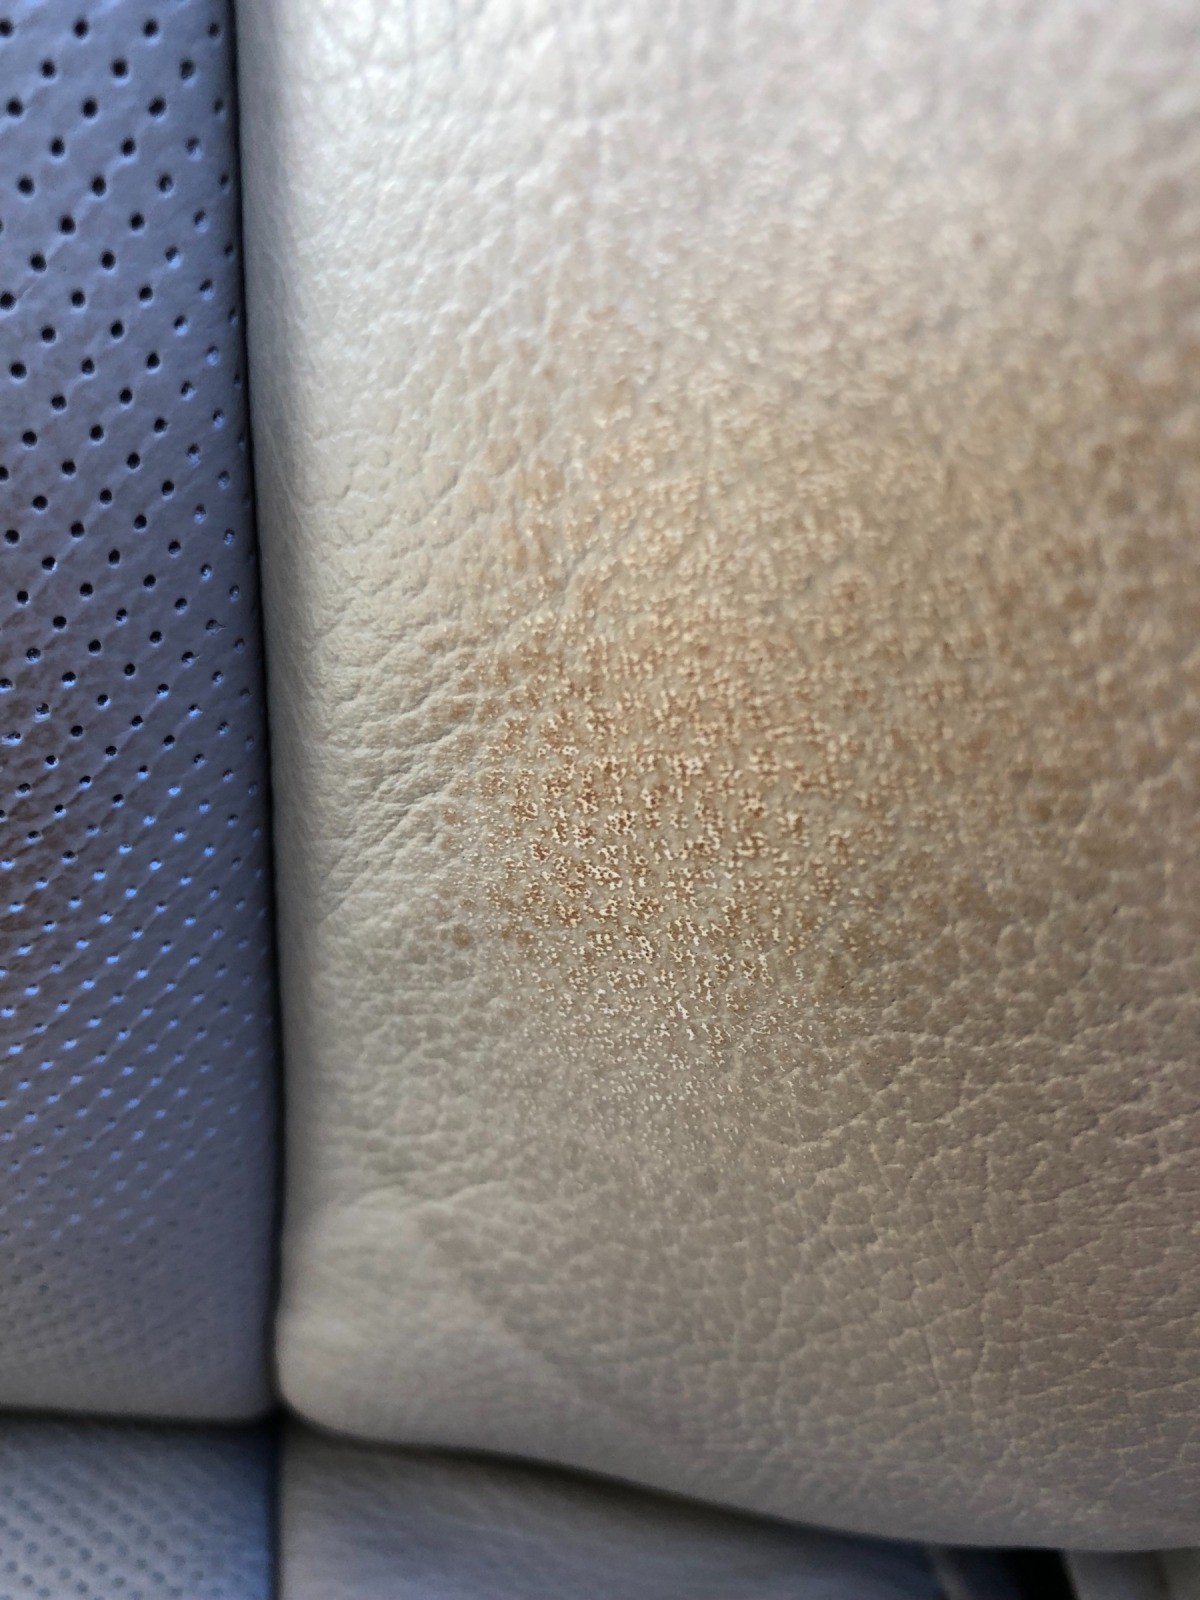 Stain On Leather Car Seat From Belt, How To Remove Old Stains From Leather Car Seats